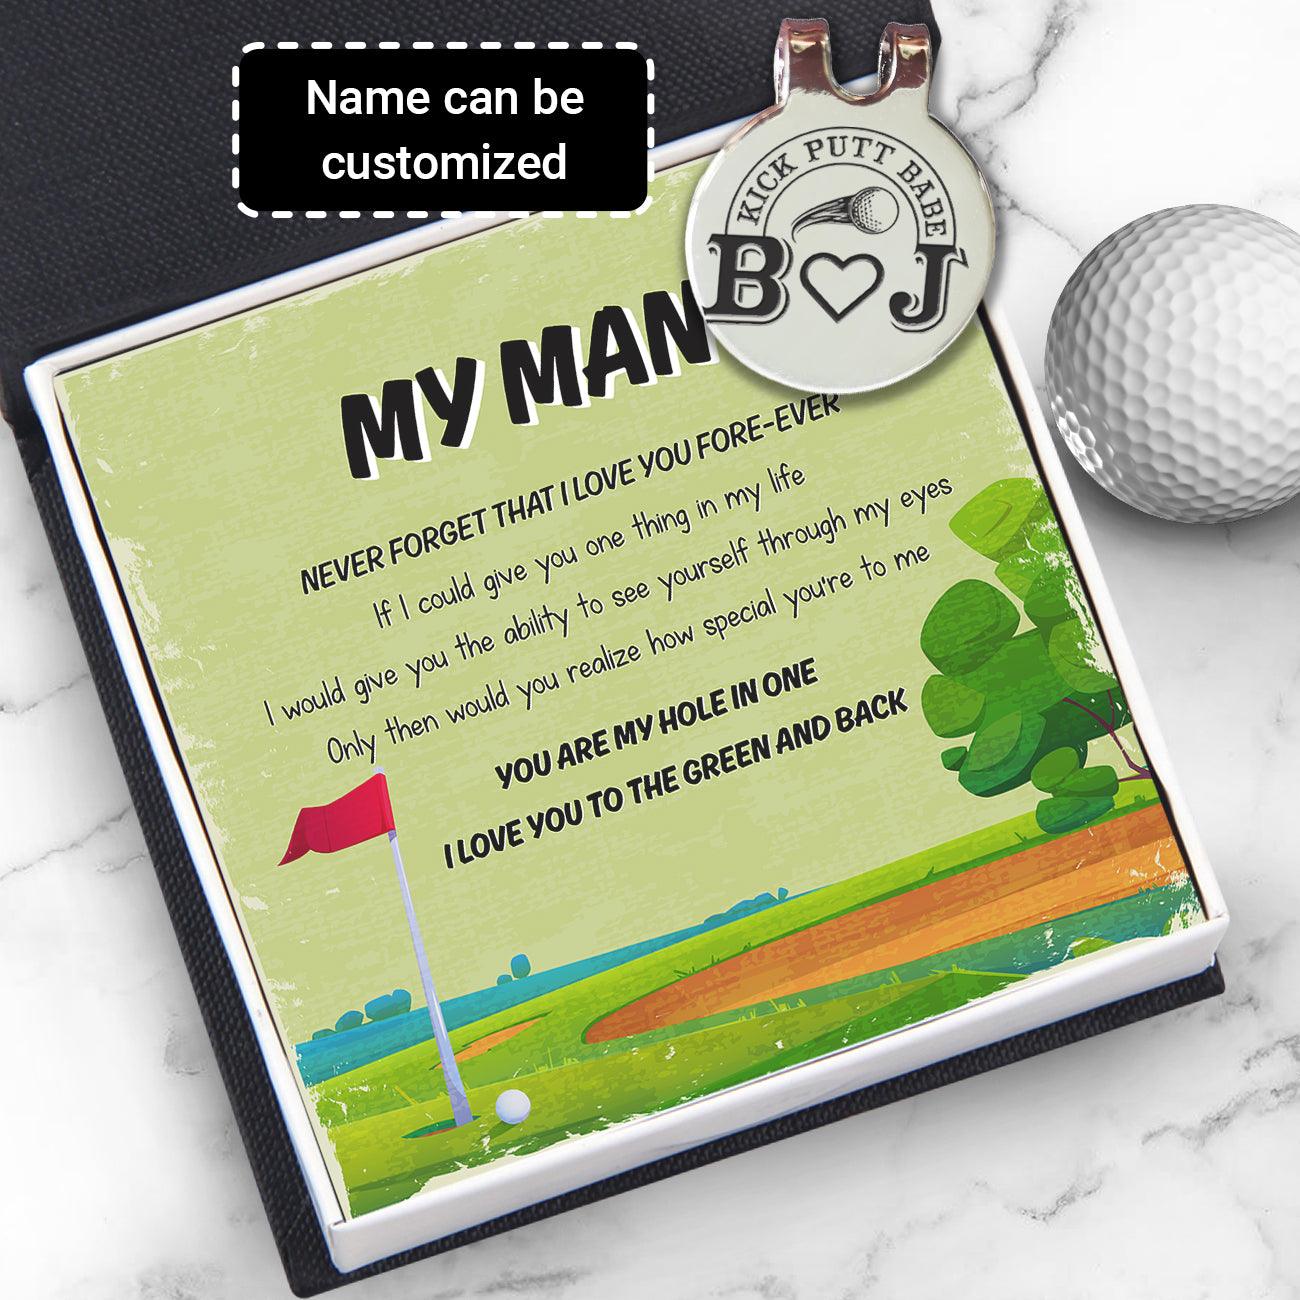 Personalised Golf Marker - Golf - To My Man - I Love You - Augata26003 - Gifts Holder